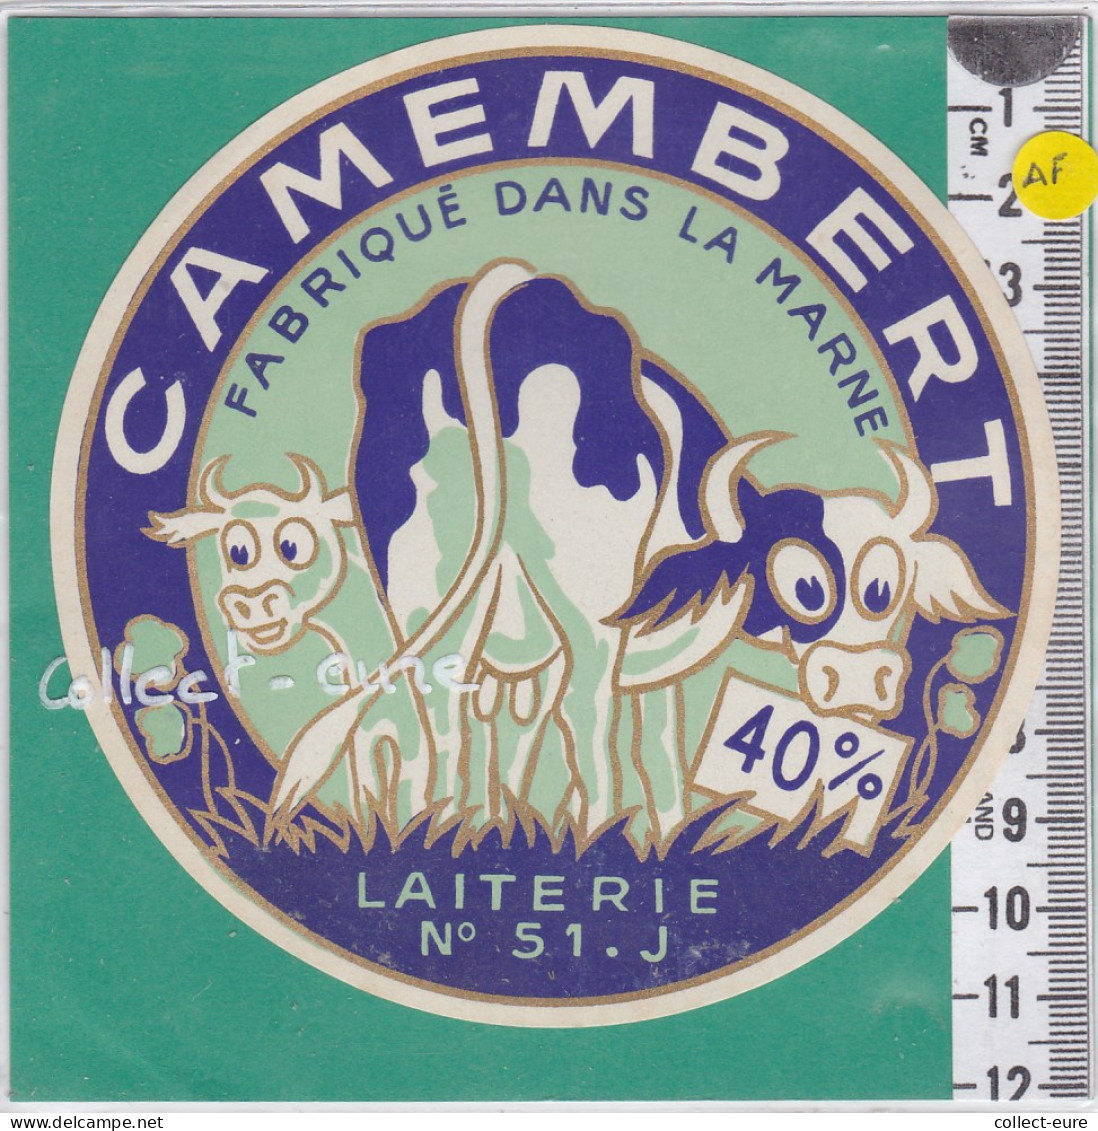 C1187 FROMAGE  CAMEMBERT  SAINT JEAN SUR MOIVRE MARNE 40 %  - Cheese